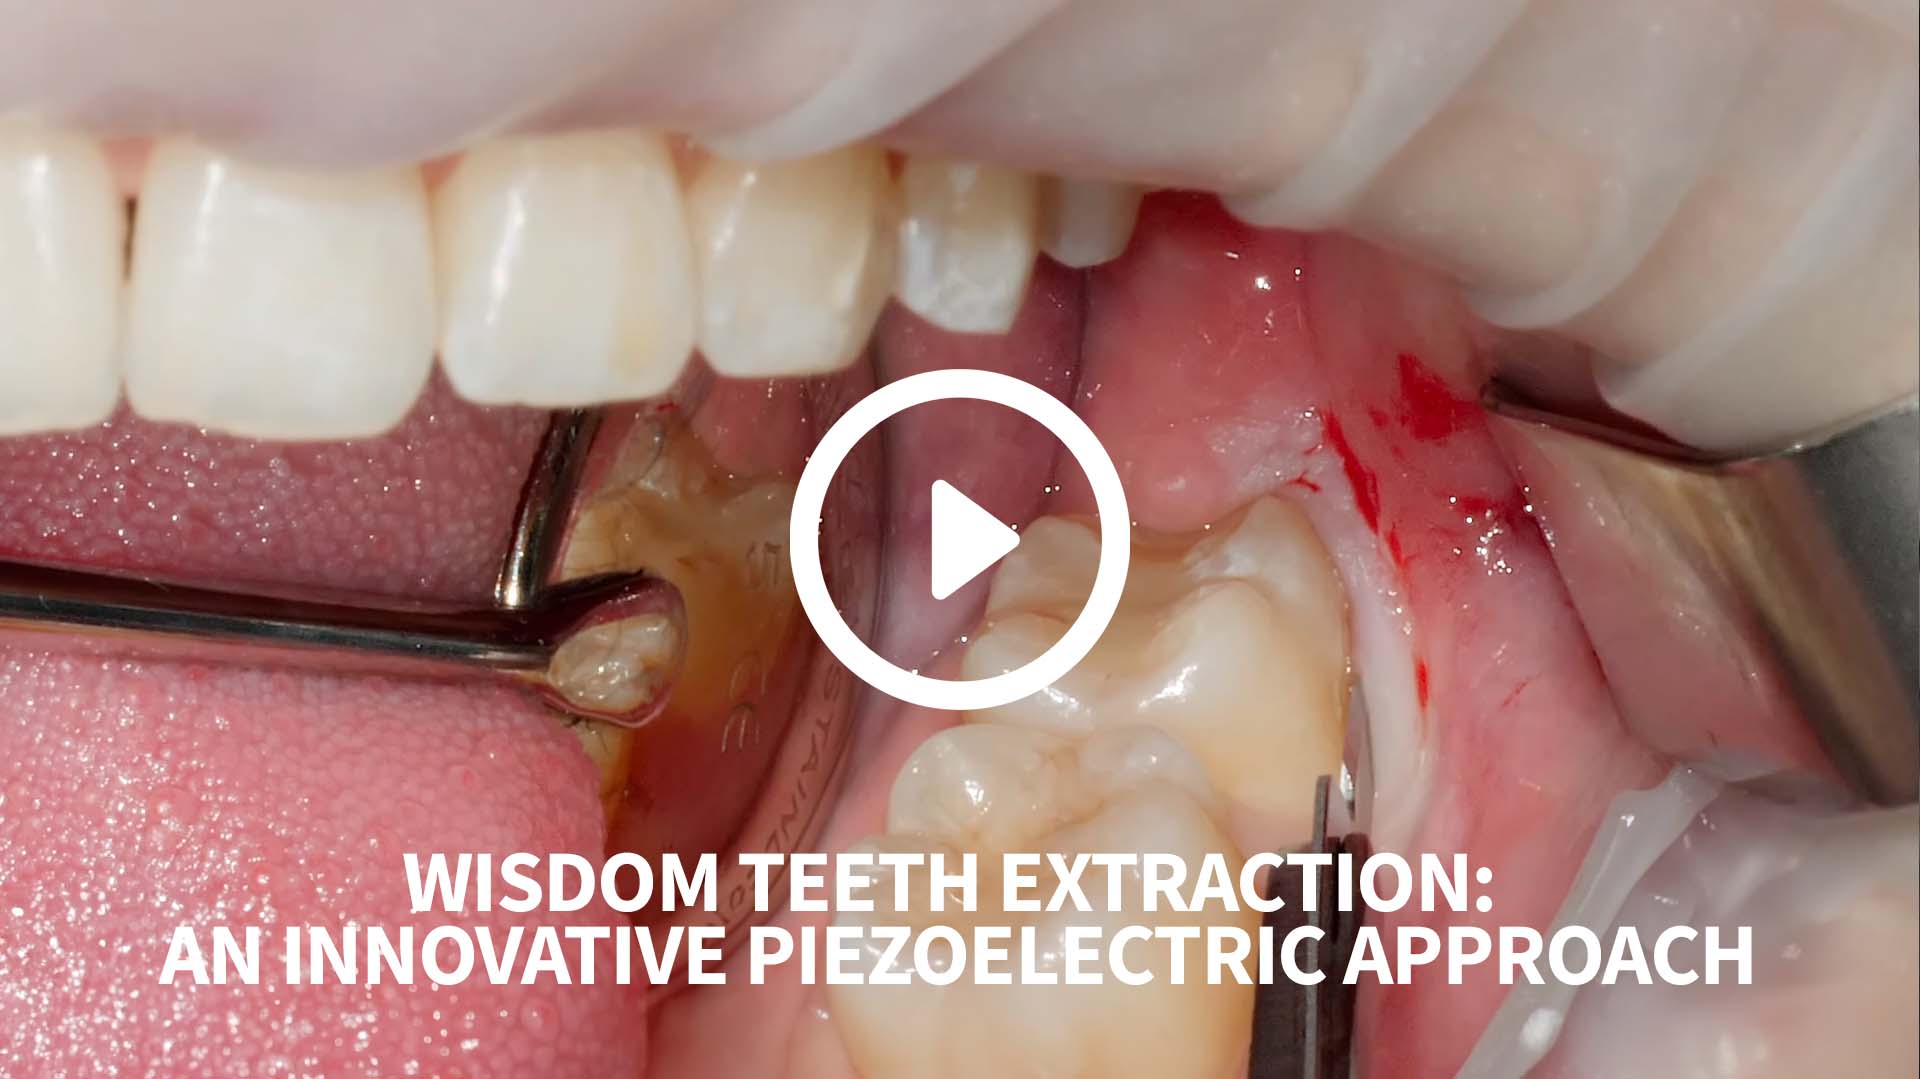 Wisdom teeth extraction - an innovative piezoelectric approach